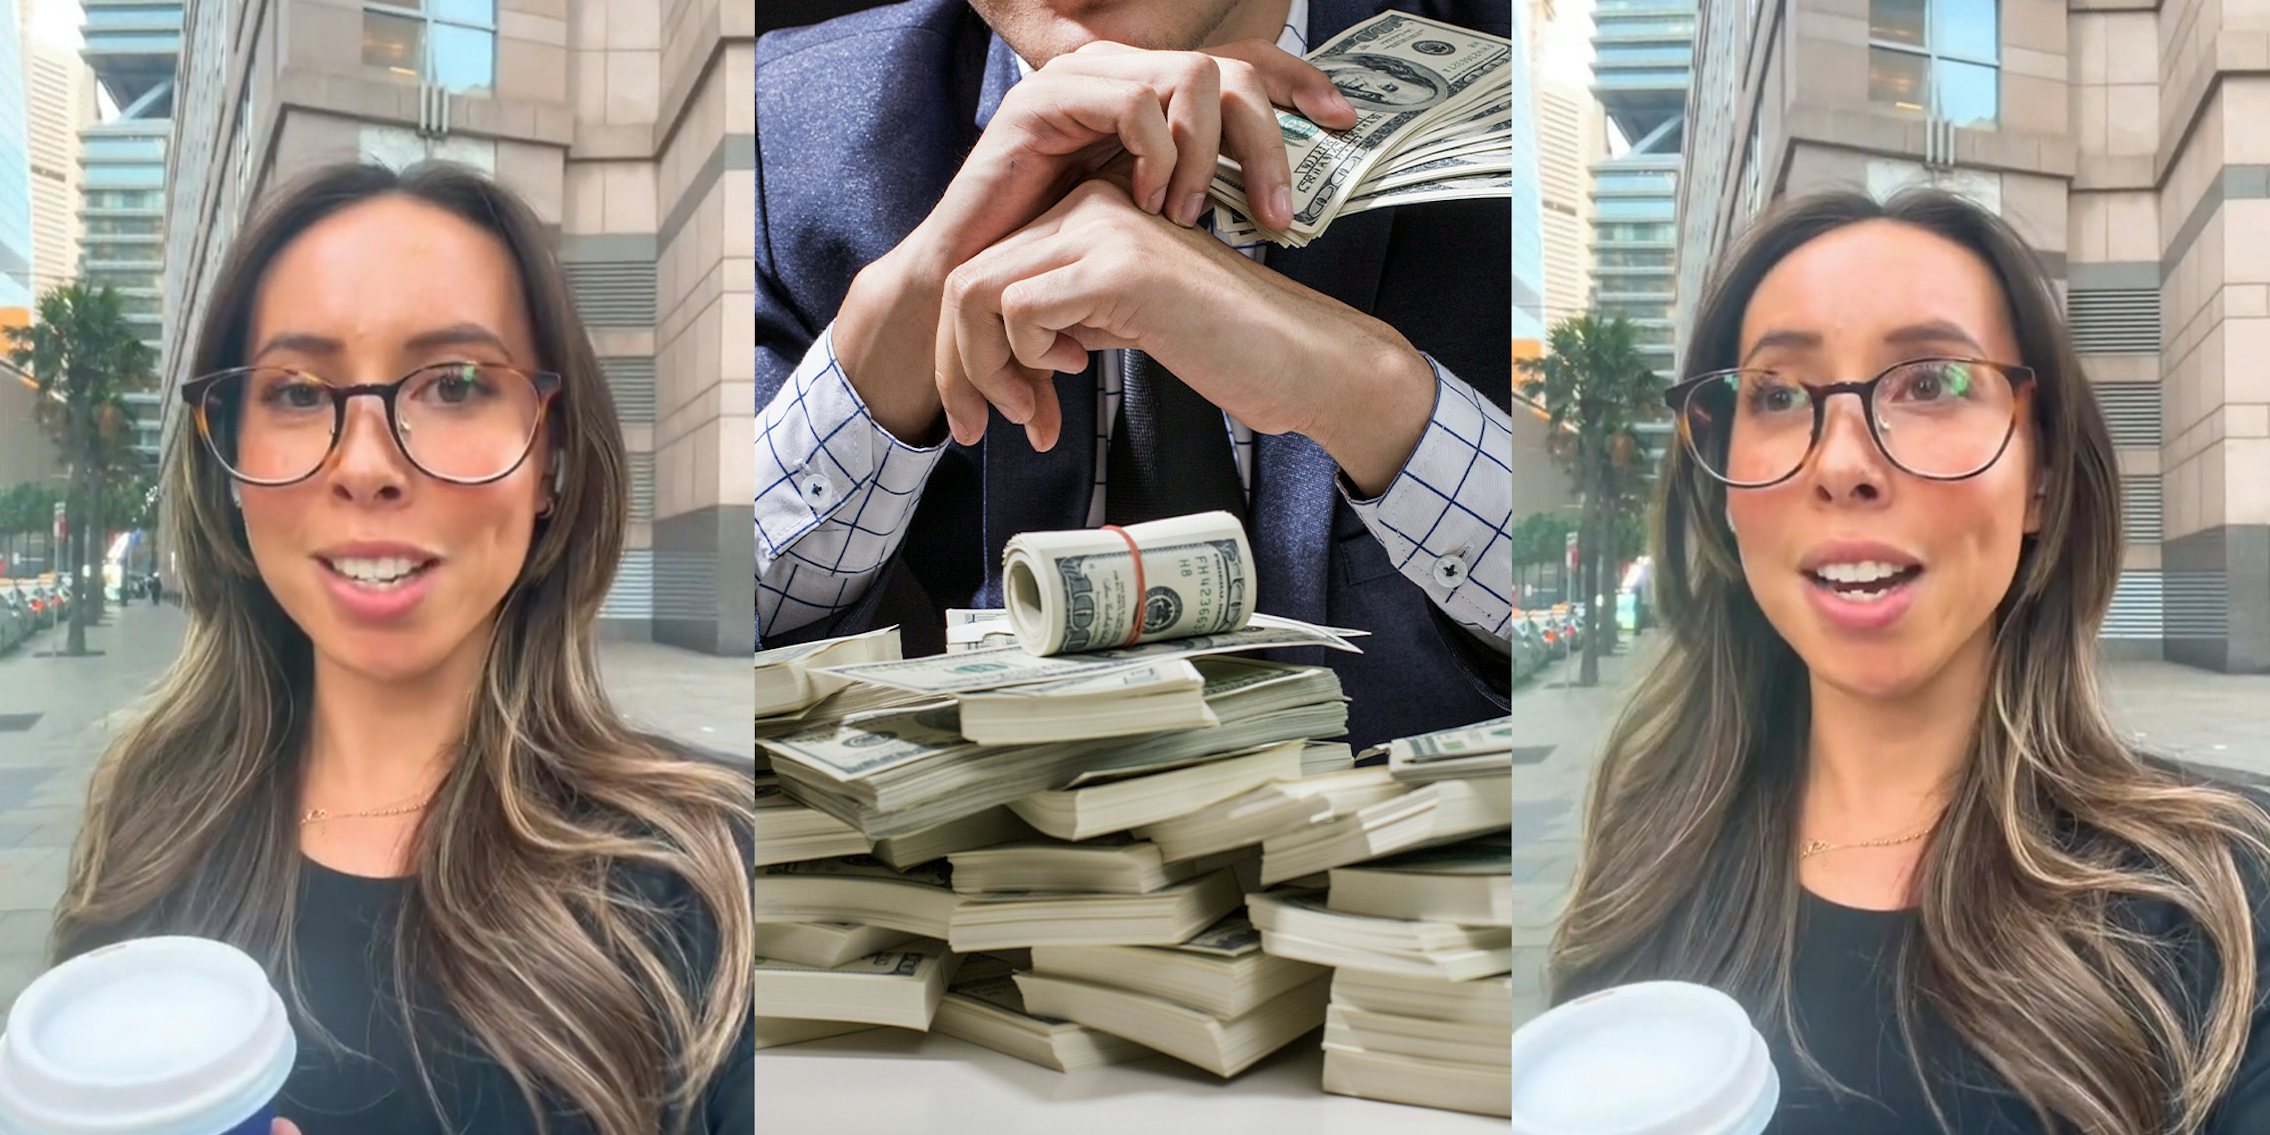 Worker shares how to tell if your co-workers make more than you